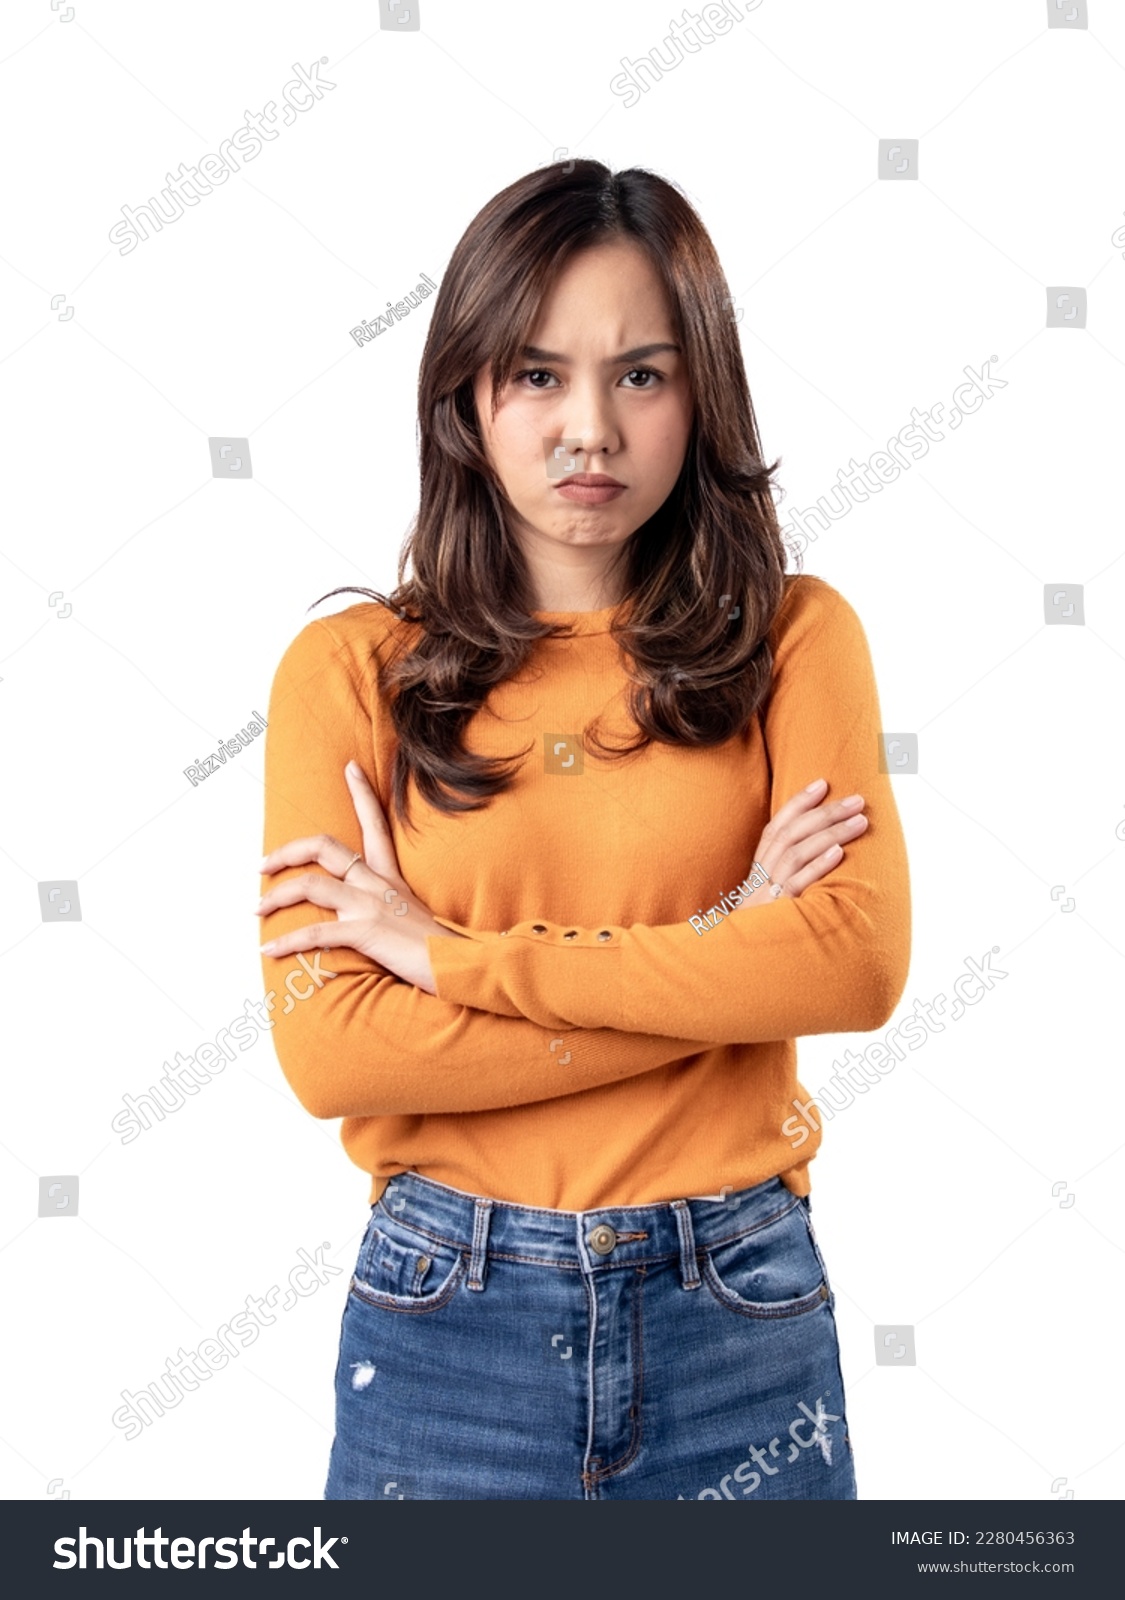 A portrait of an Asian Indonesian woman wearing an orange sweater and looking unhappy, folding her arms, isolated on a white background #2280456363